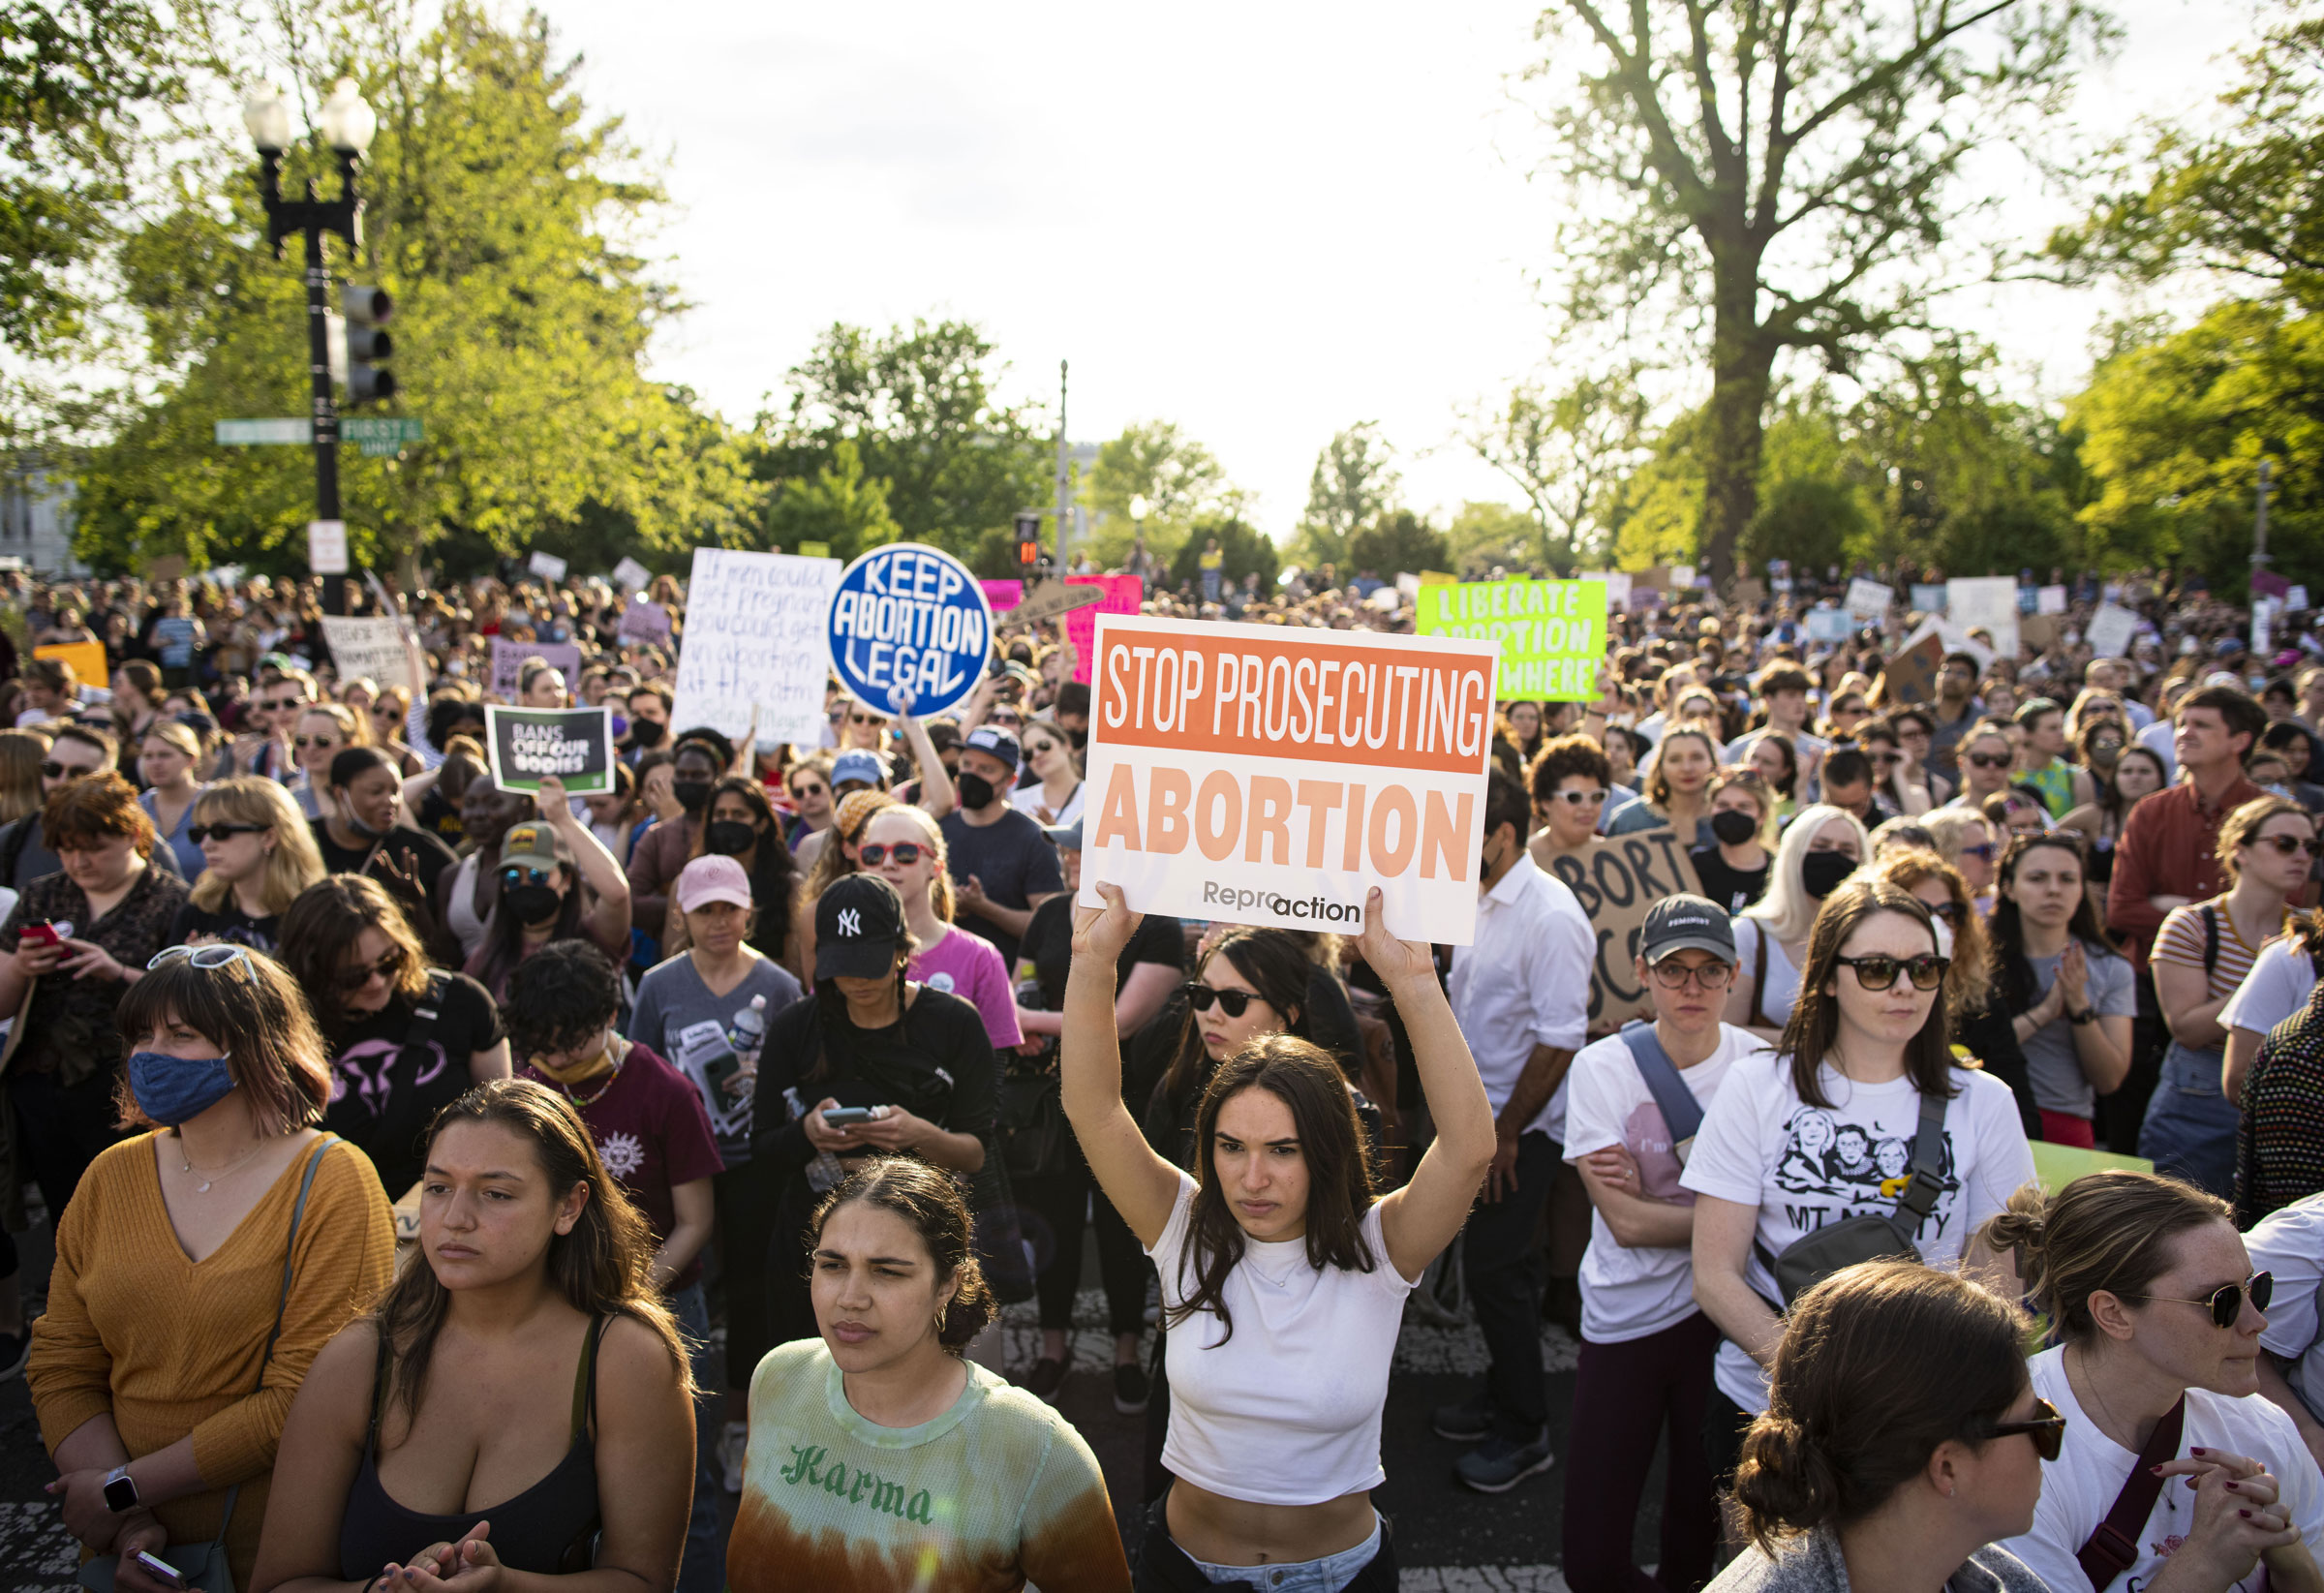 Abortion rights demonstrators during a protest outside the U.S. Supreme Court in Washington, D.C., U.S., on Tuesday, May 3, 2022. (Al Drago—Bloomberg/Getty Images)